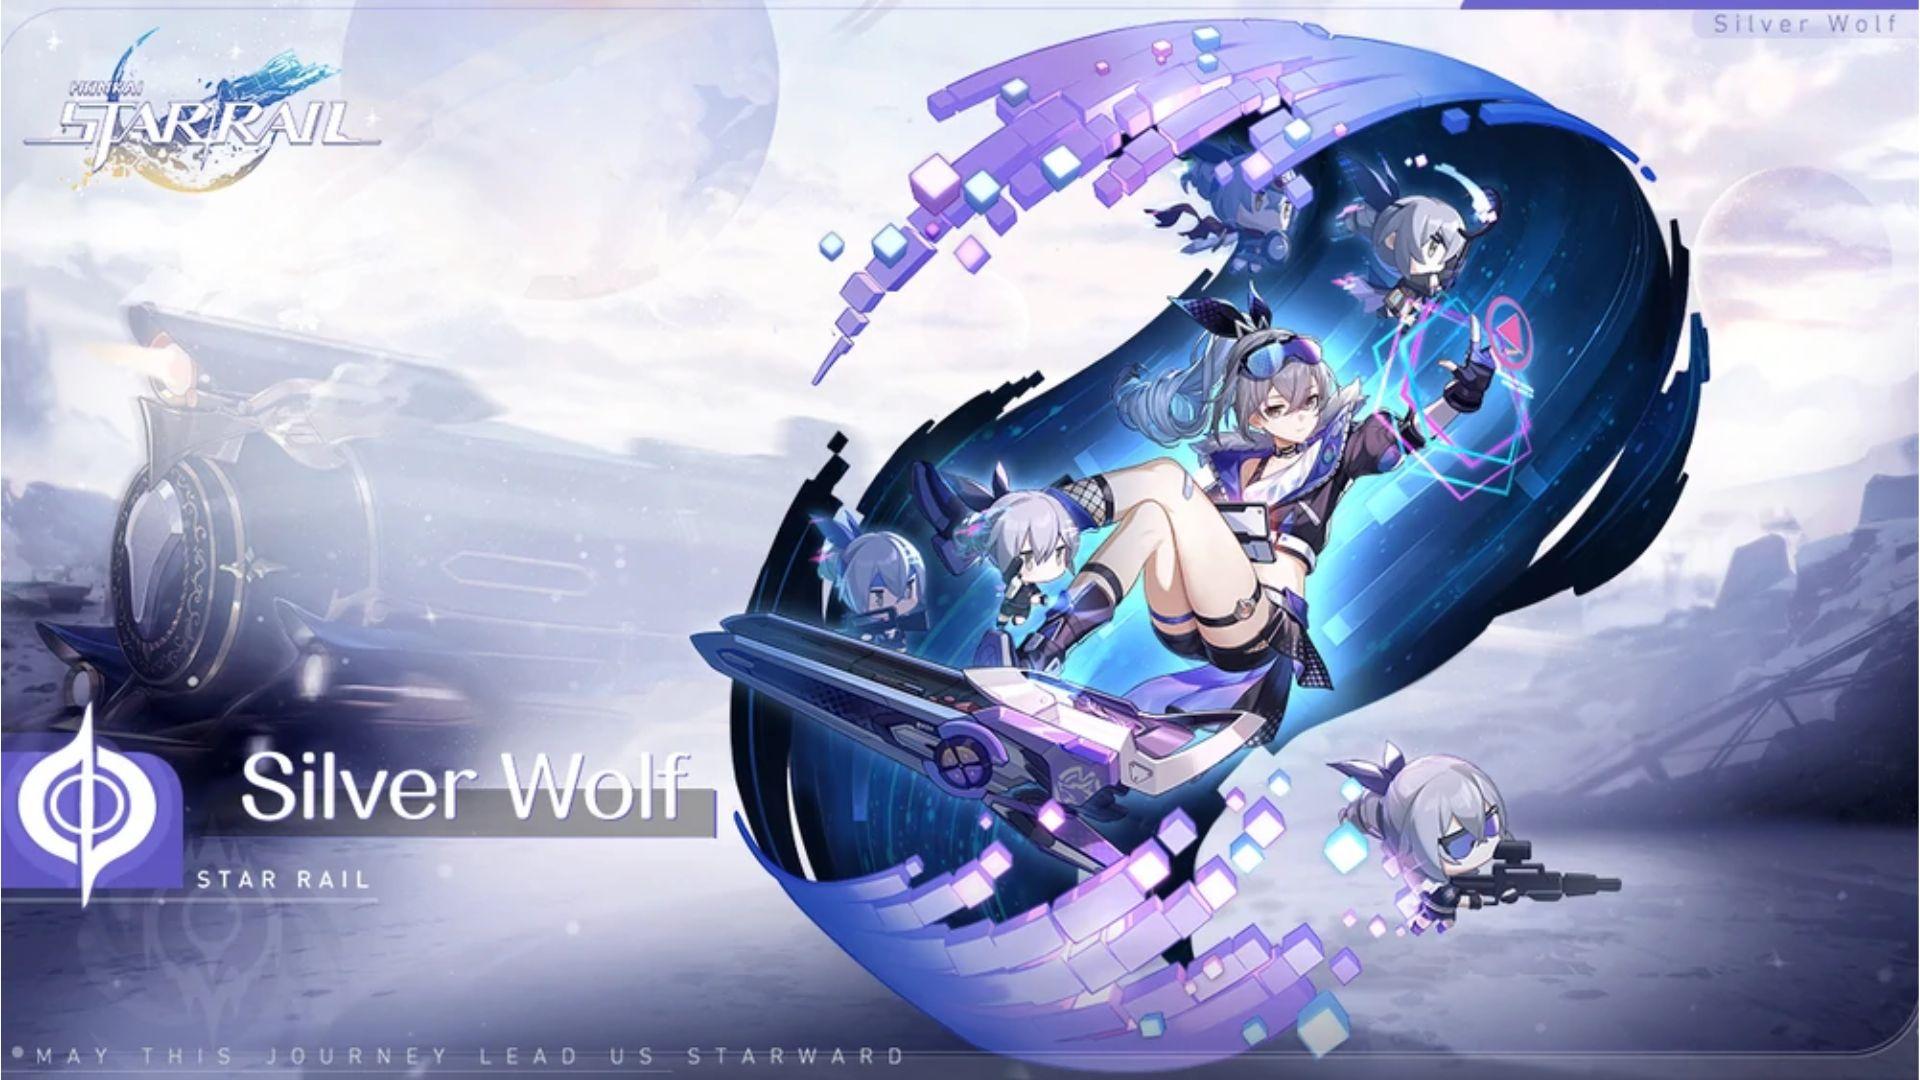 An image of official Silver Wolf artwork.